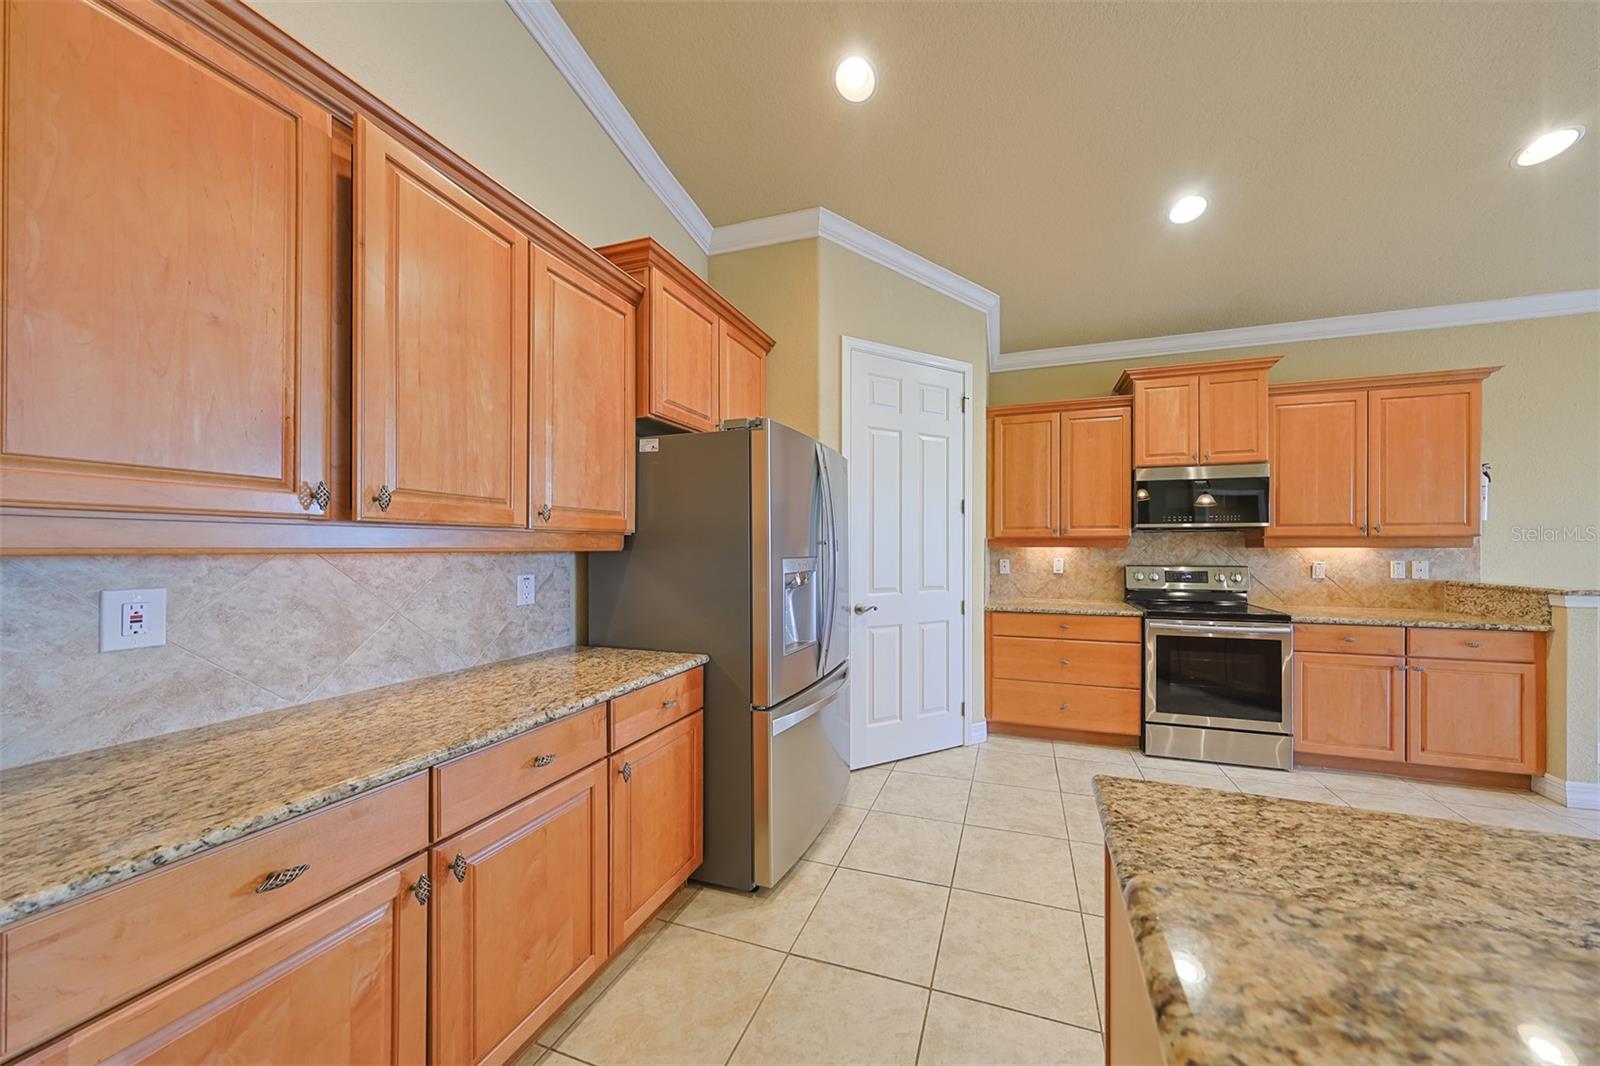 The abundant kitchen cabinets are a handsome honey oak color, with pull out drawers and a large walk-in pantry closet.  Notice the 10' ceilings, recessed lights and lovely crown molding.